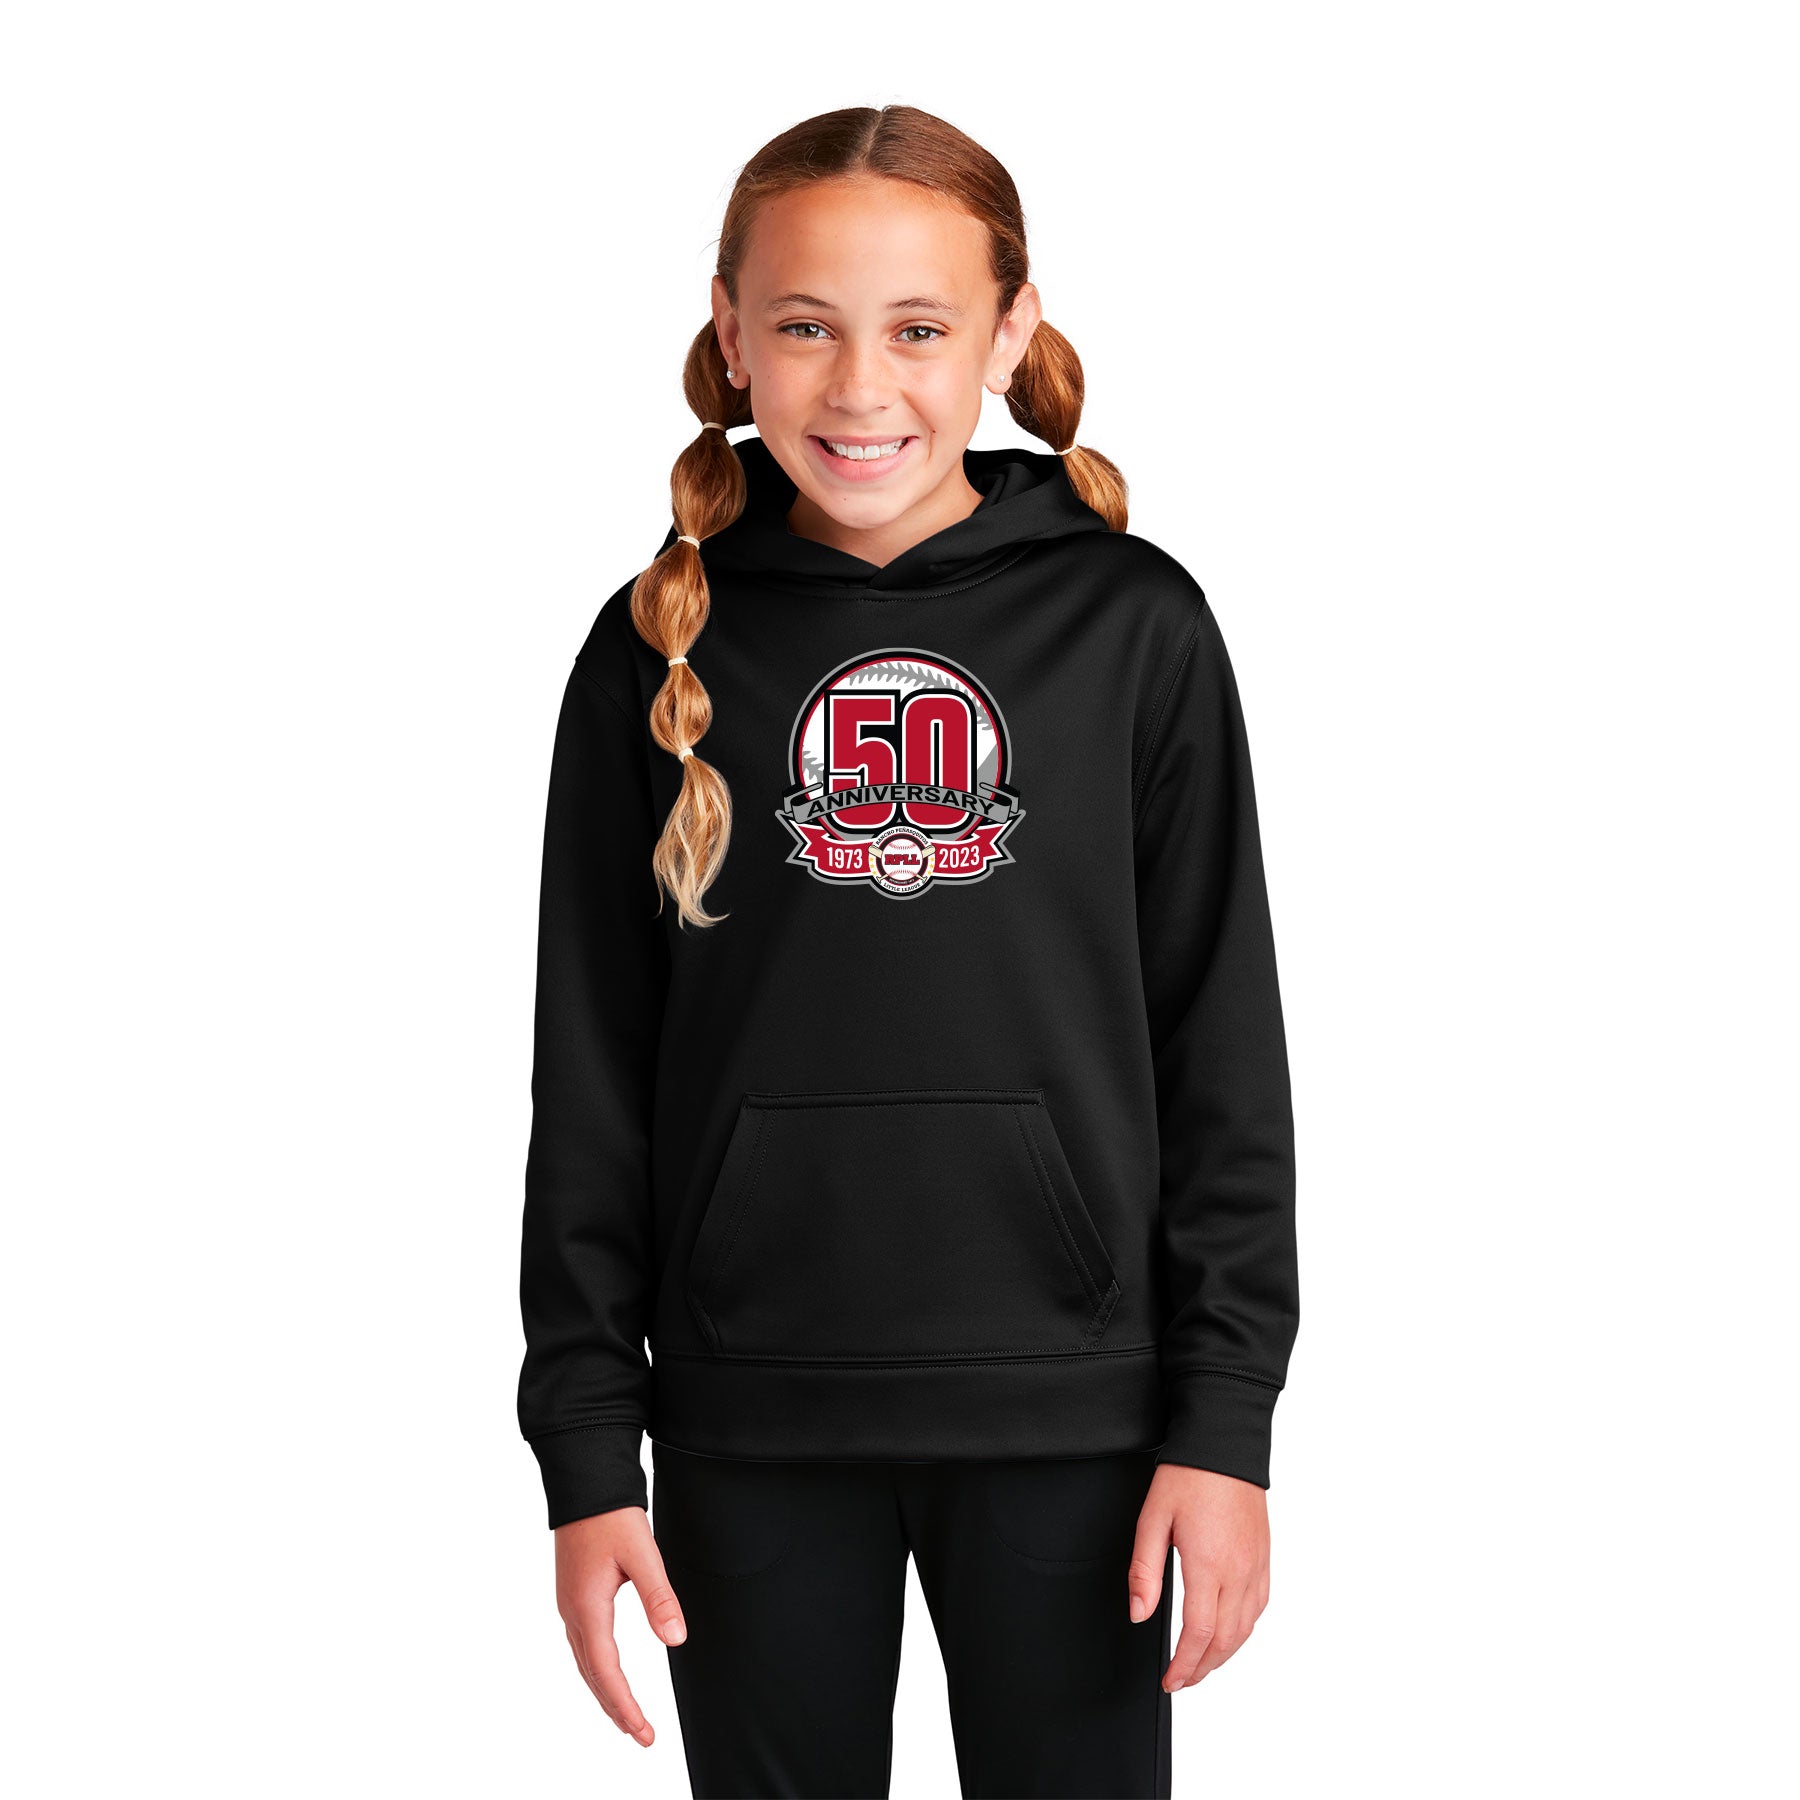 RPLL 50 PATCH ADULT & YOUTH PERFORMANCE HOODED SWEATSHIRT